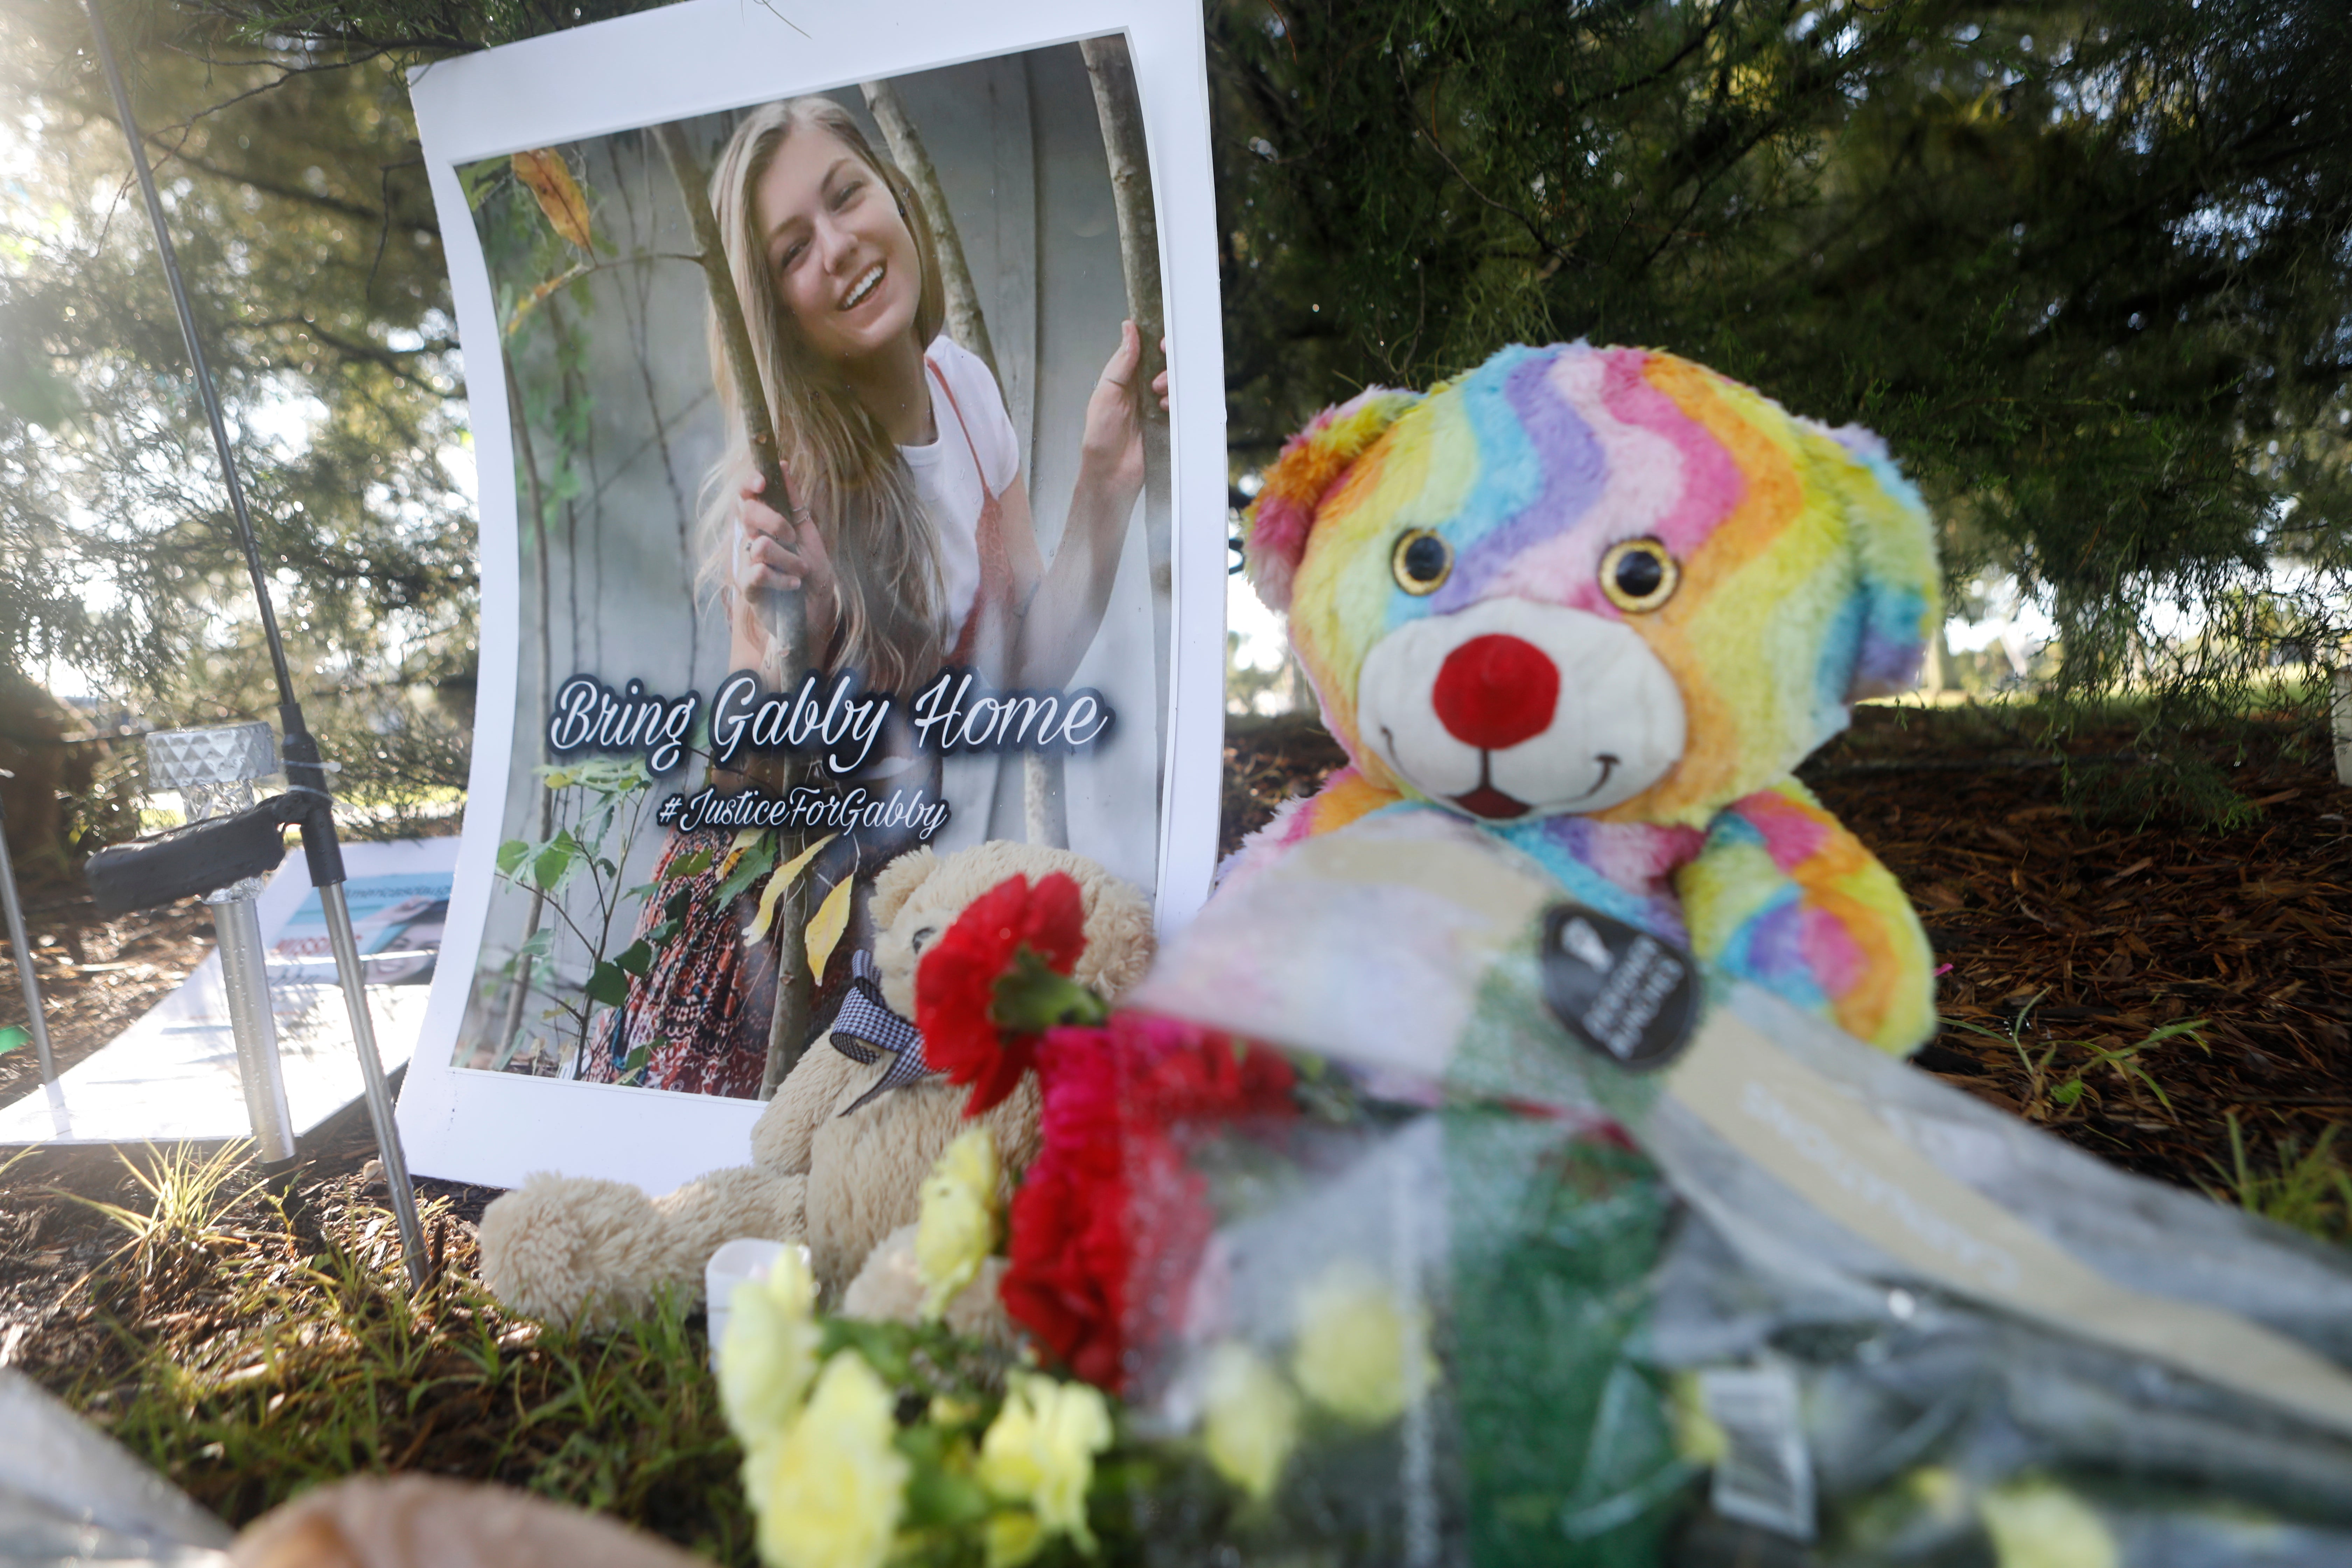 A makeshift memorial dedicated to Gabby Petito near City Hall in North Port, Florida